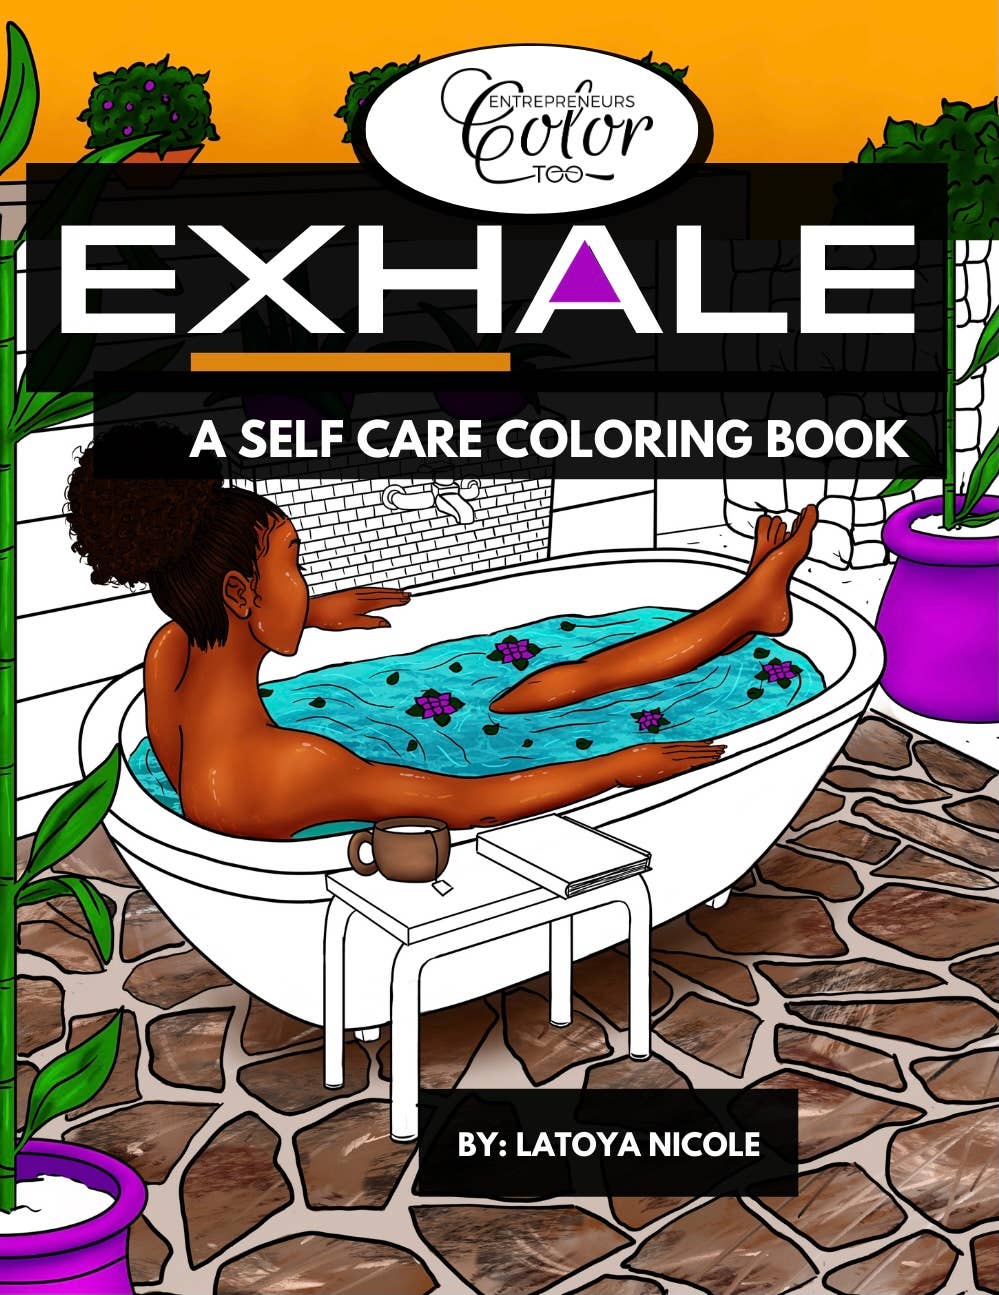 Exhale: A Self Care Coloring Book Celebrating Black Women